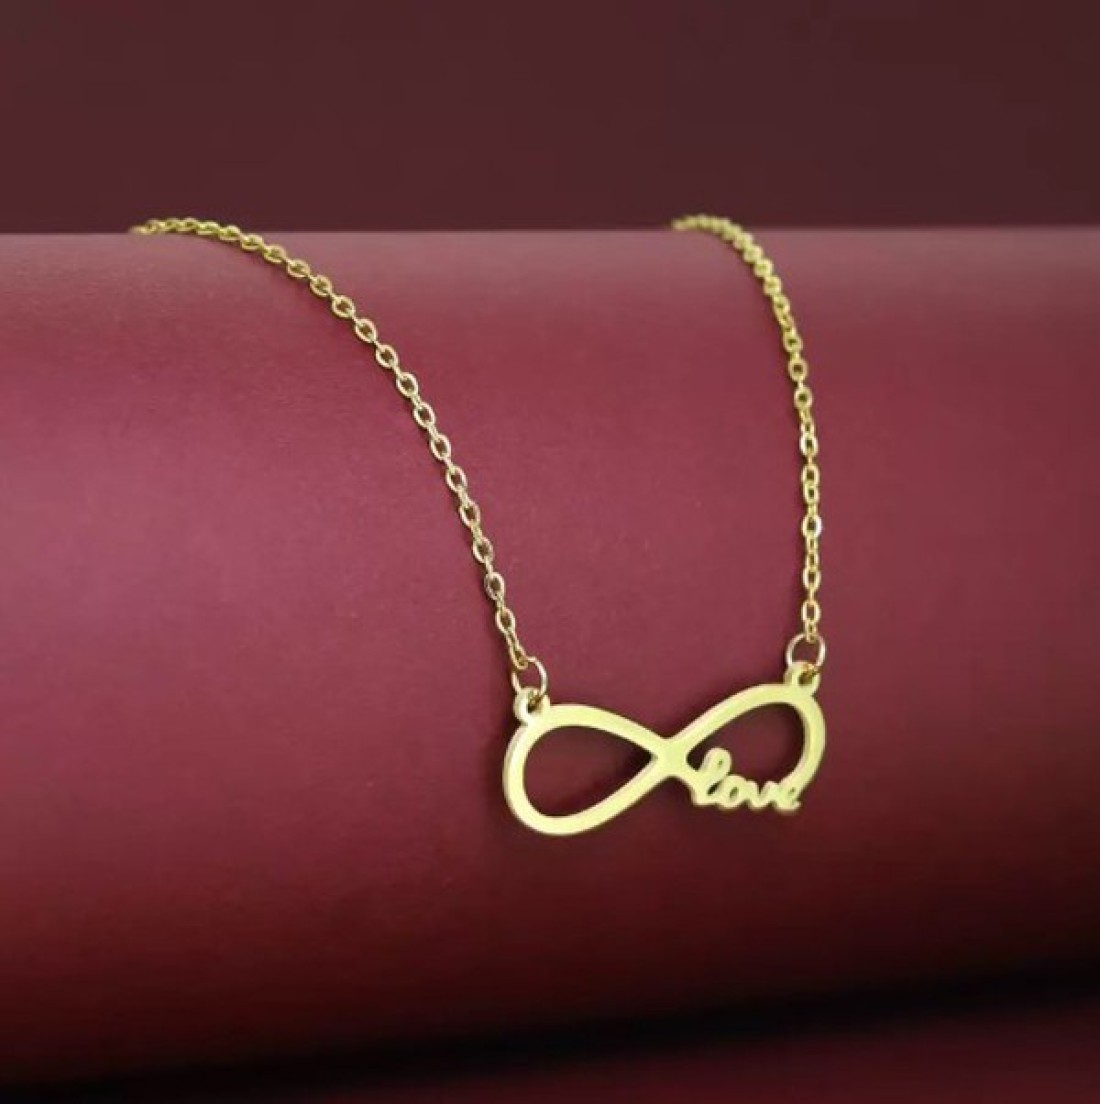  Gold Infinity Love Pendant Necklace for Women Girls